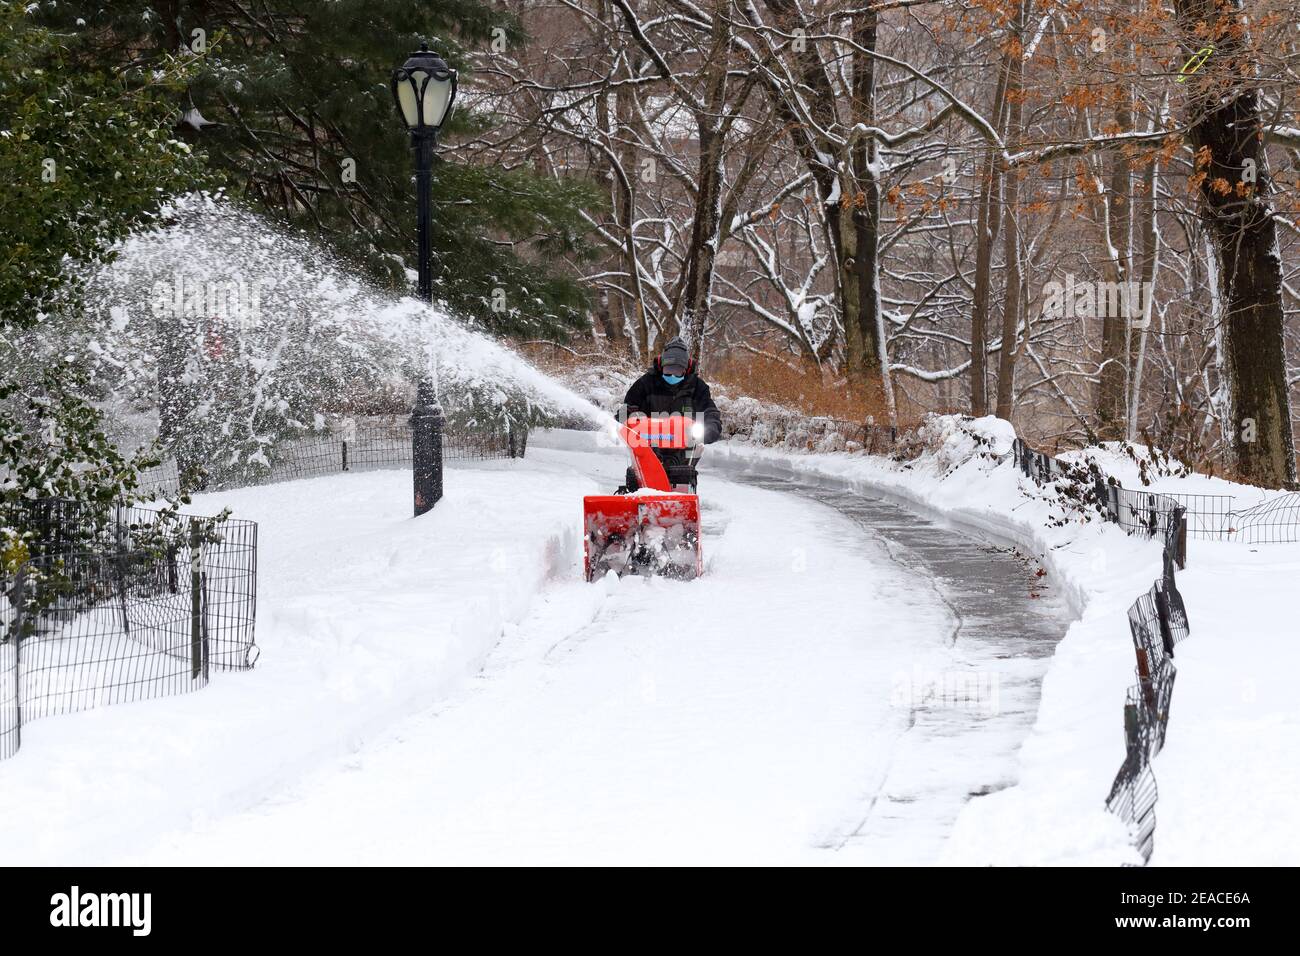 A worker clears snow from a Central Park pathway with a snowblower after a winter snowstorm in New York, NY. Stock Photo